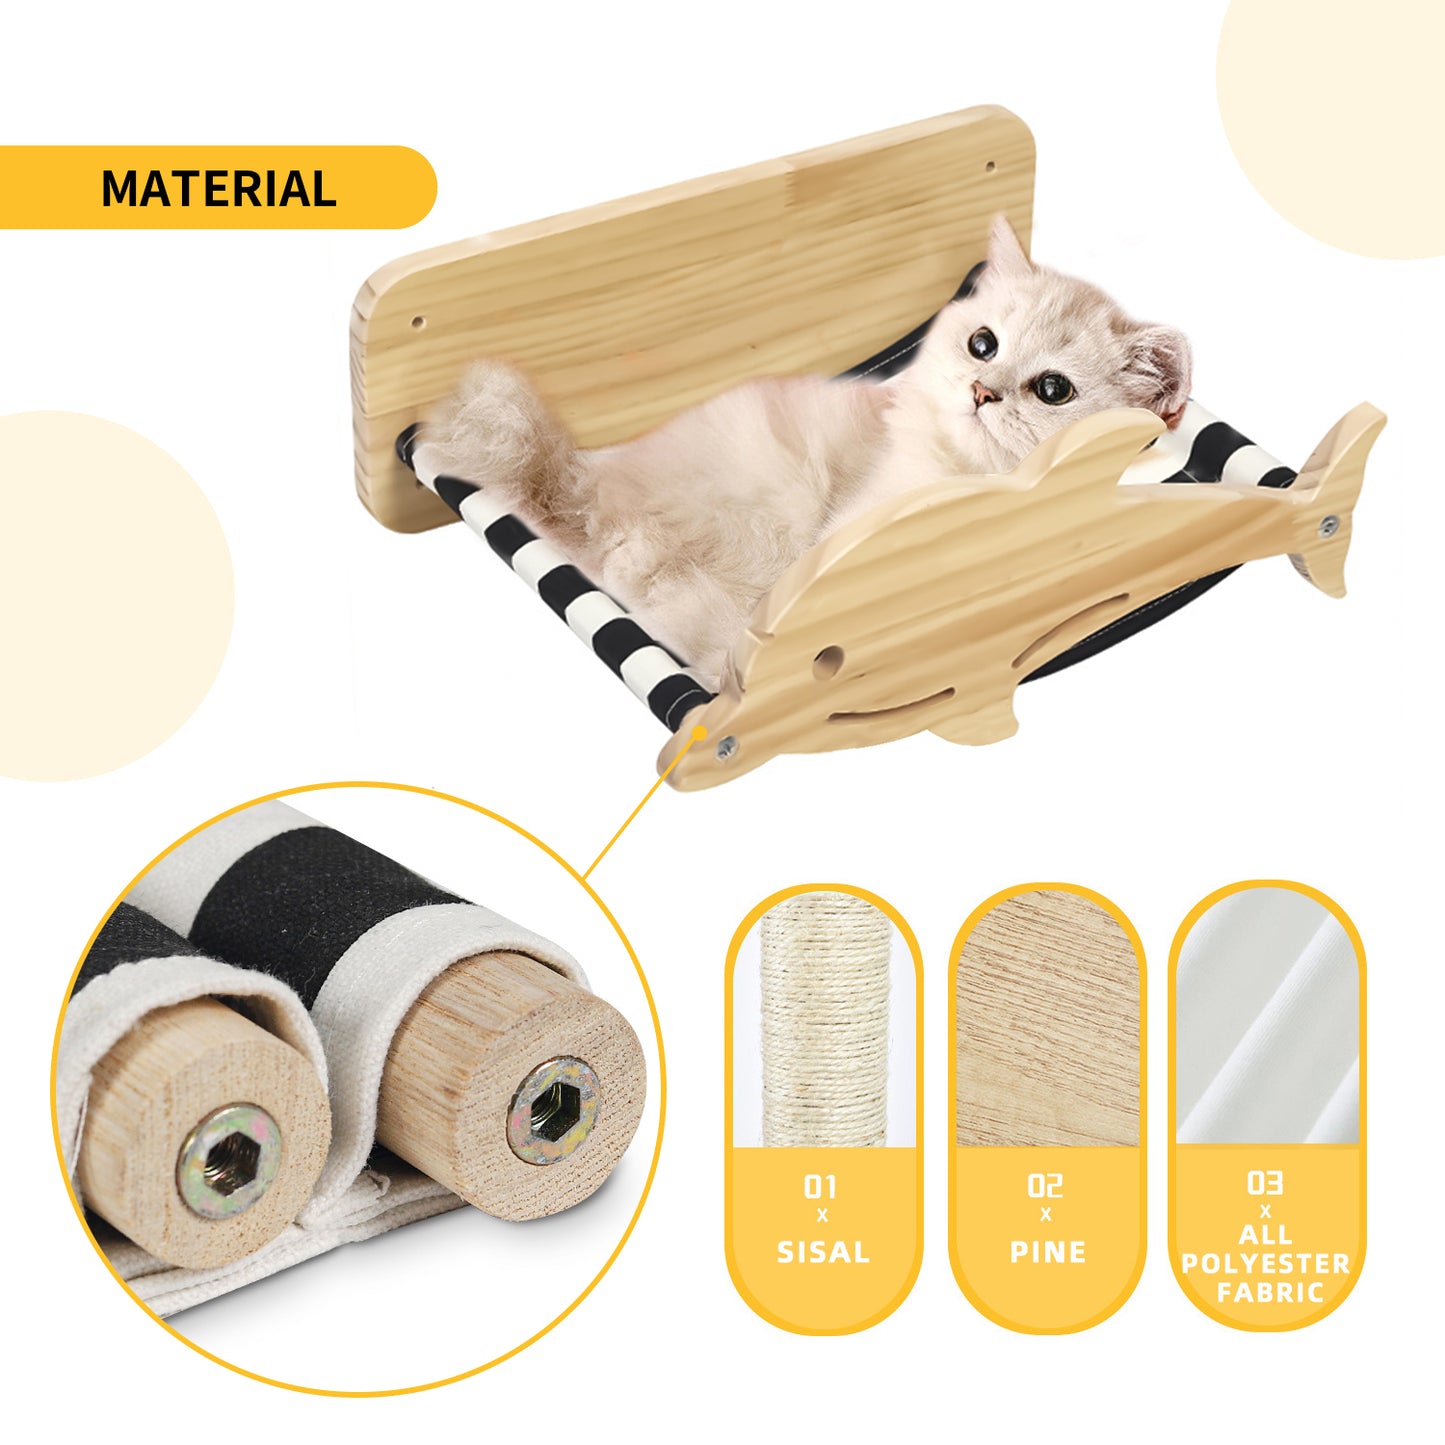 Cat Wall Bed Hammock Cat Scratching Post Mounted, Mount Cat Tree Lounge Set, Cat Hammock Scratching Post Cat Furniture, Used for Sleeping, Playing, Climbing, Easily Accommodates 35 Pounds